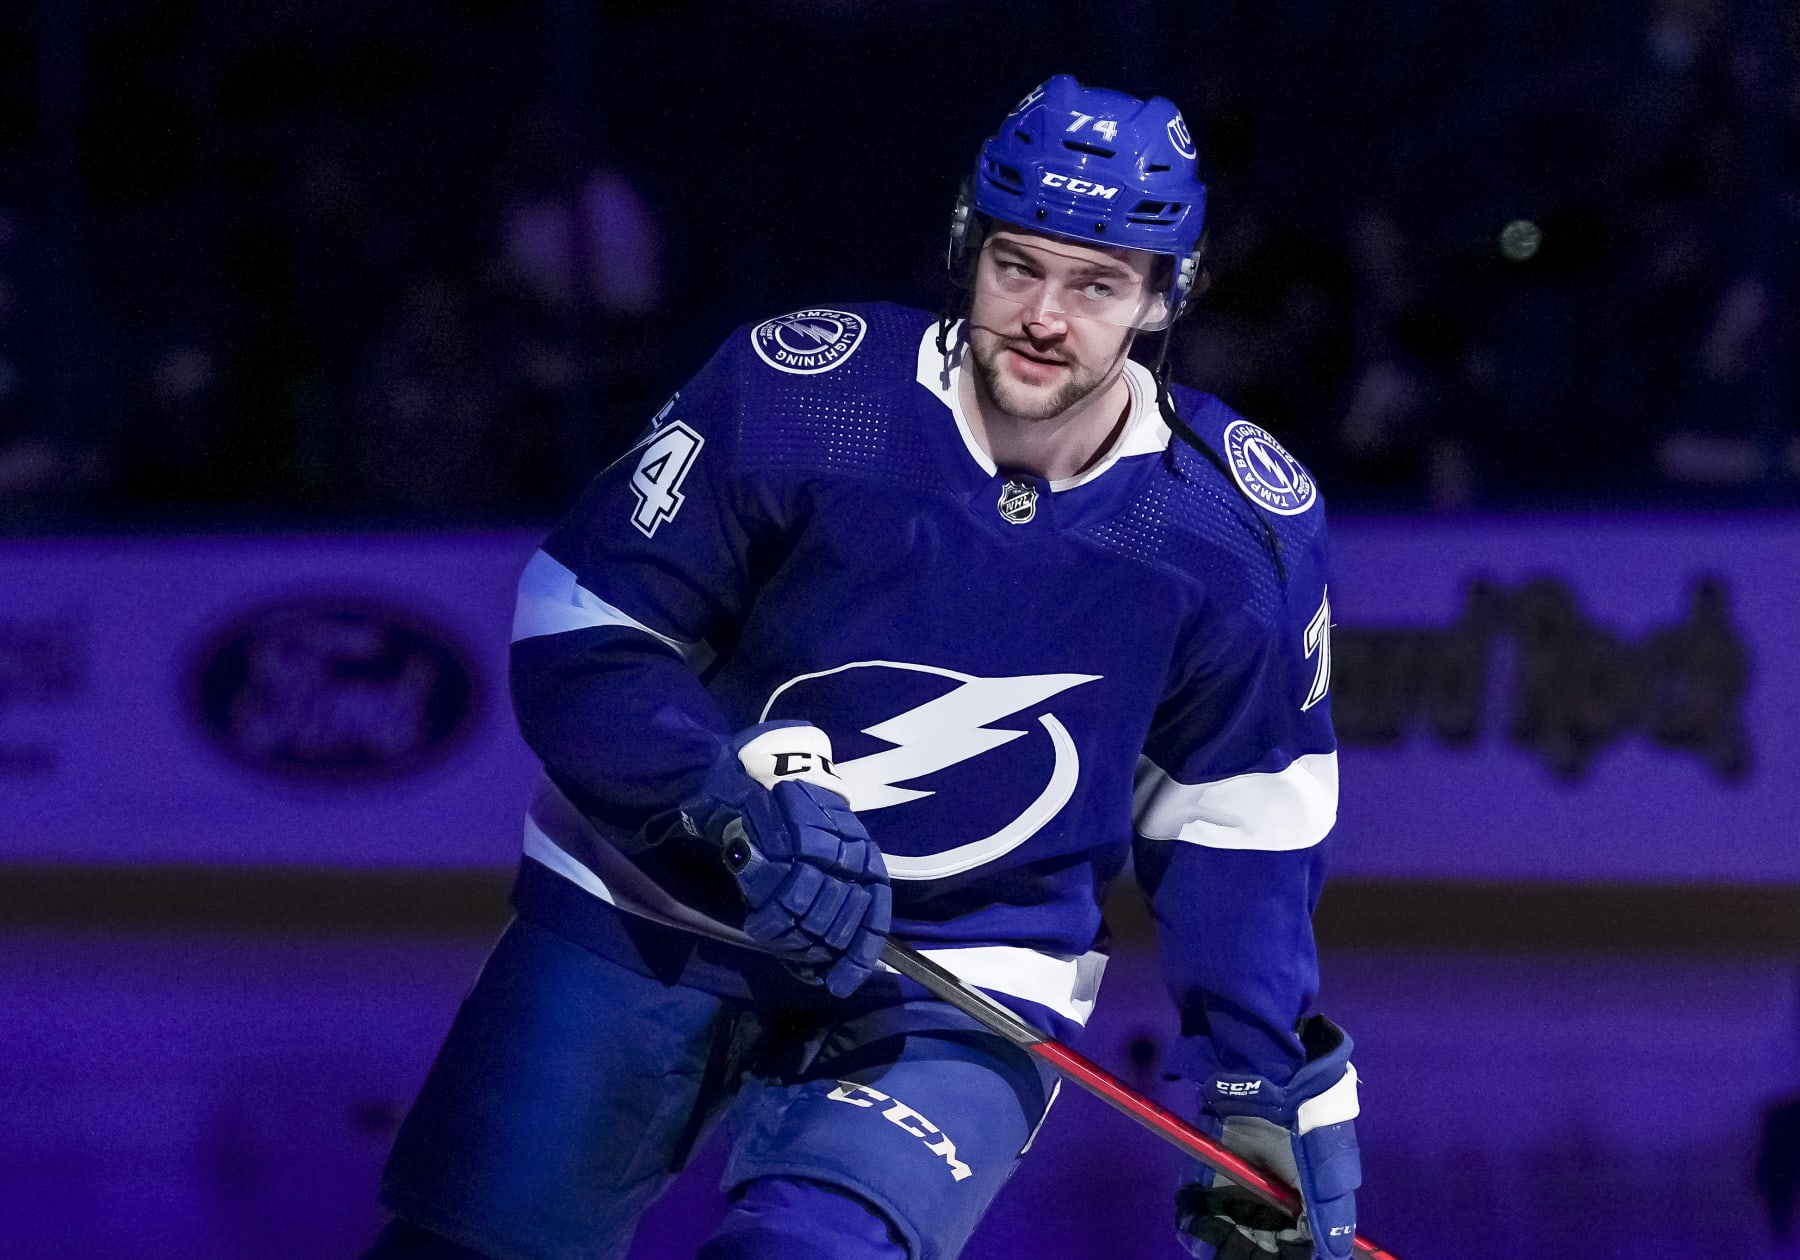 Lightning players won't get to live out Olympic dream